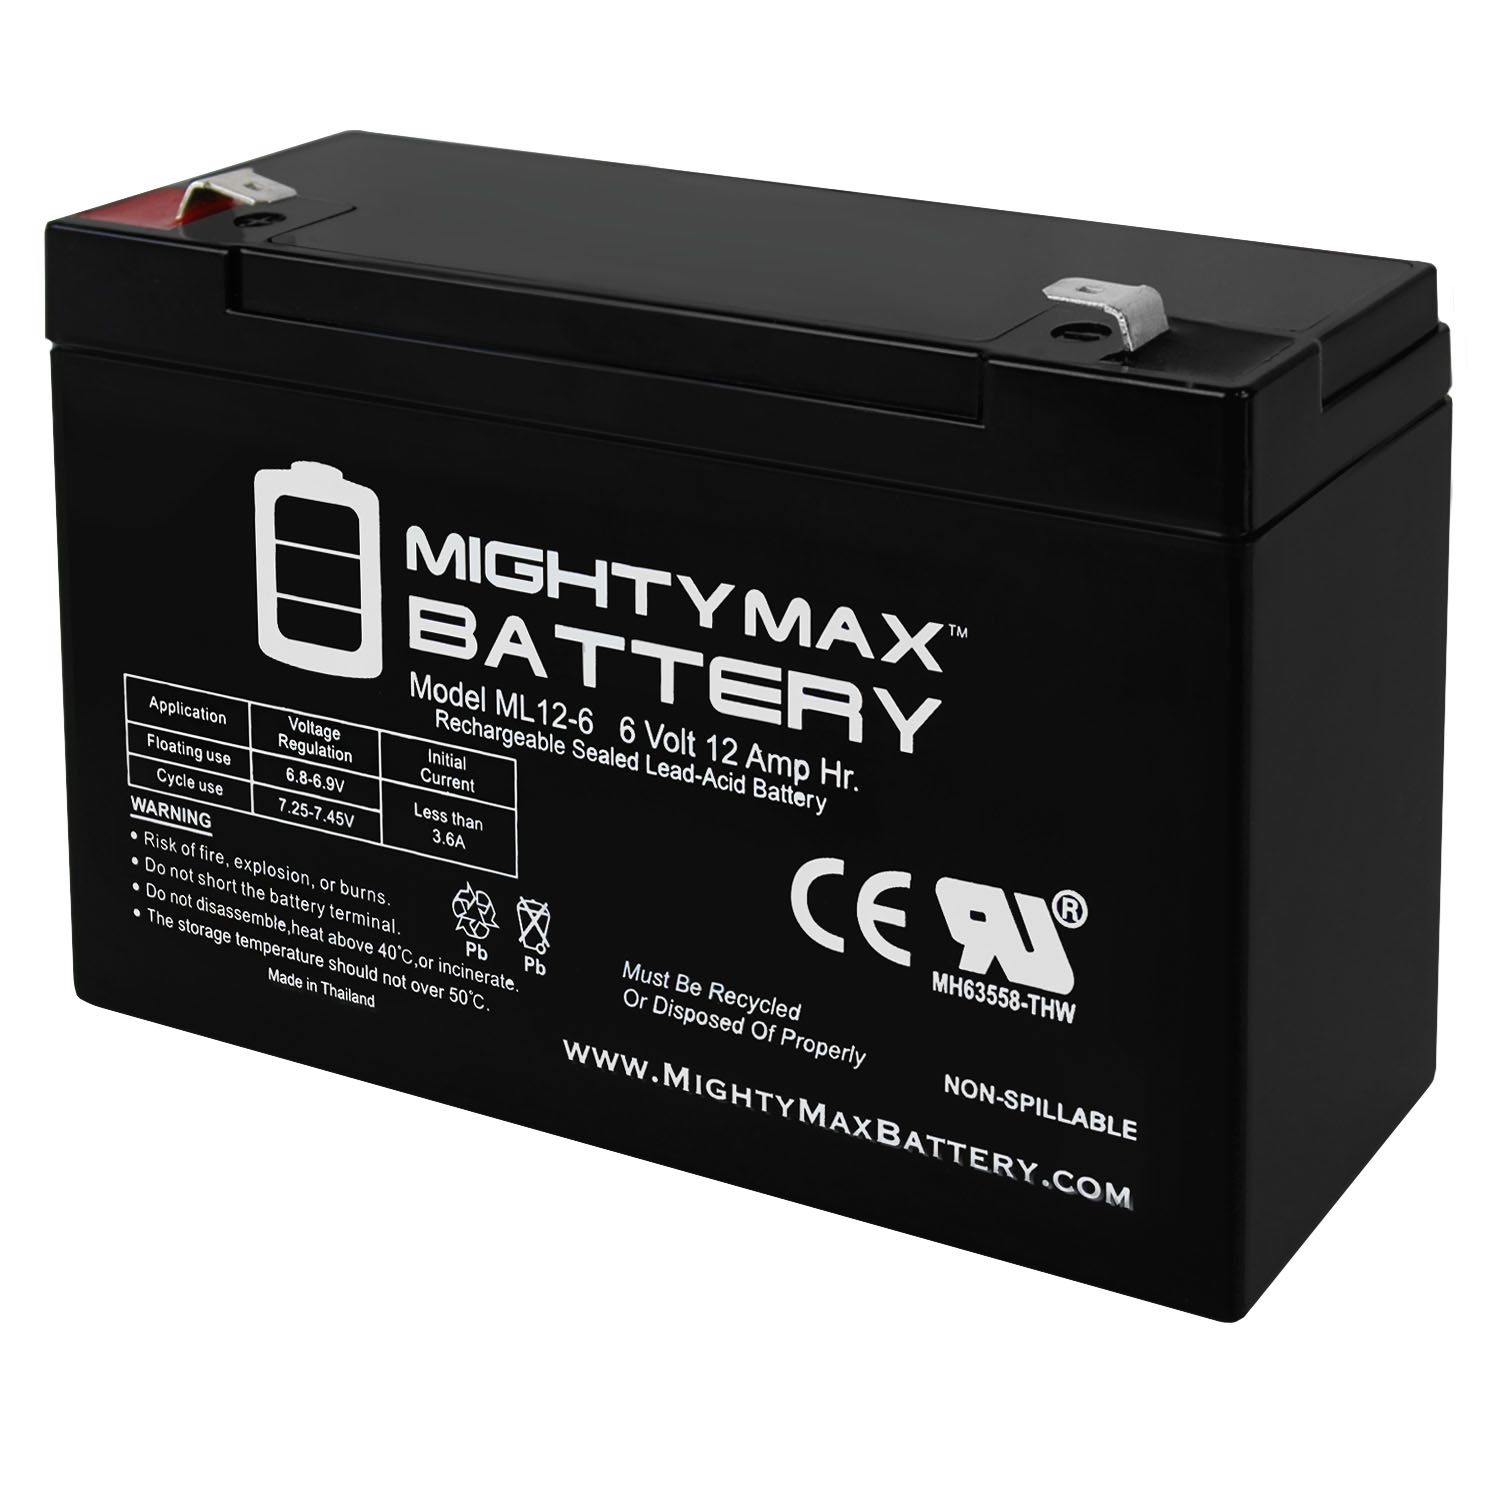 Mighty Max 6V 12AH F2 SLA Replacement Battery for APC BACK-UPS BK575C, BK600C